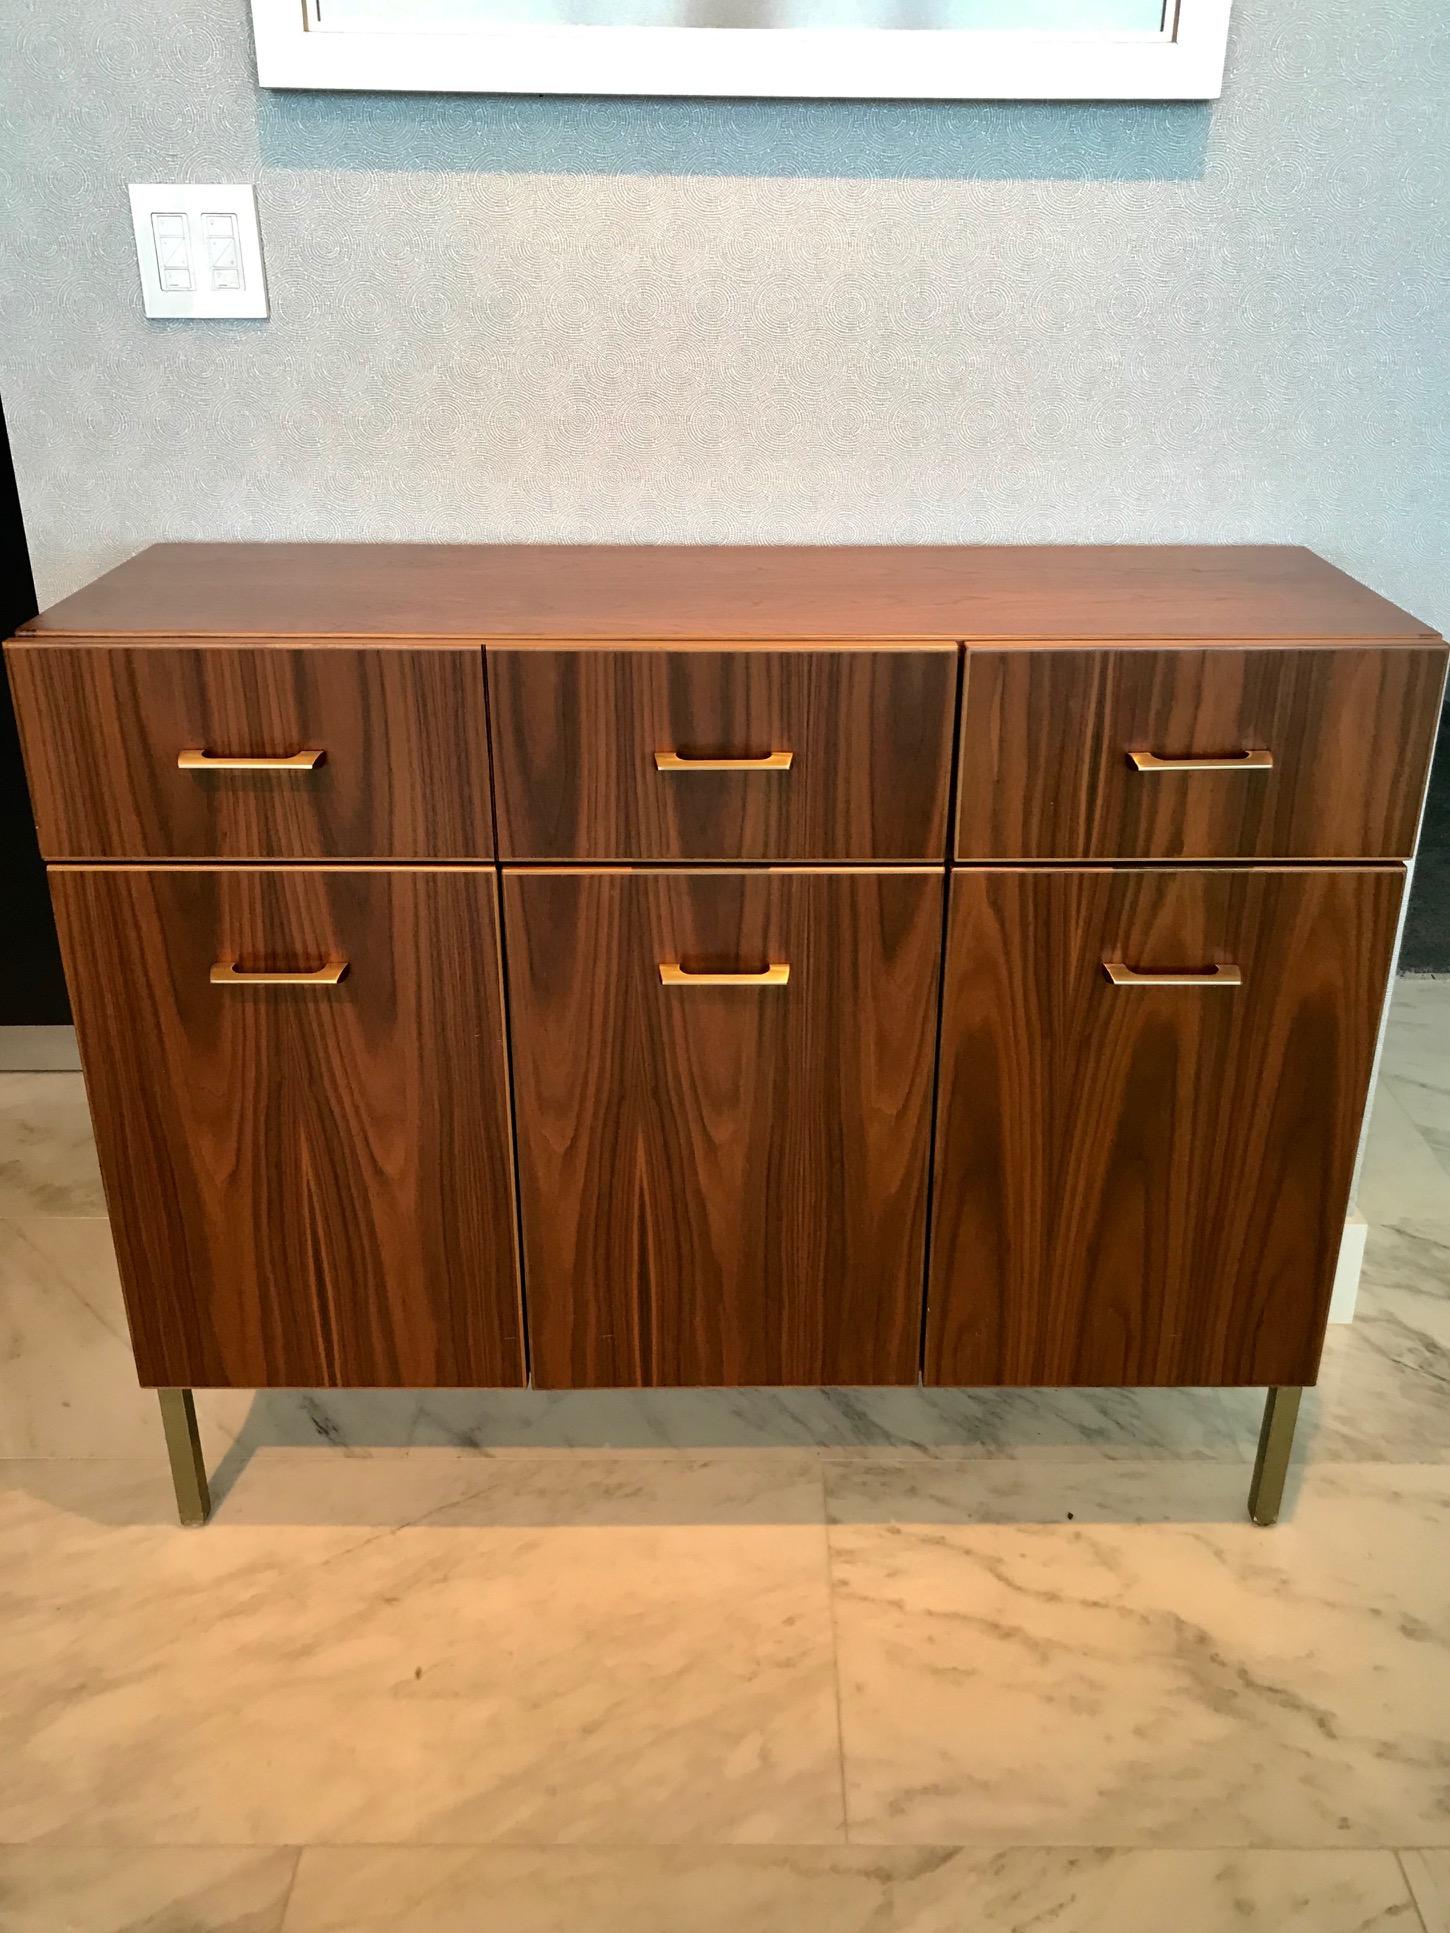 Custom modernist cabinet in bookmatched walnut wood with satin brass hardware. Elegant streamline design fitted with long double drawer and with single drawer on the top portion. Cabinet doors open to reveal interior storage with adjustable